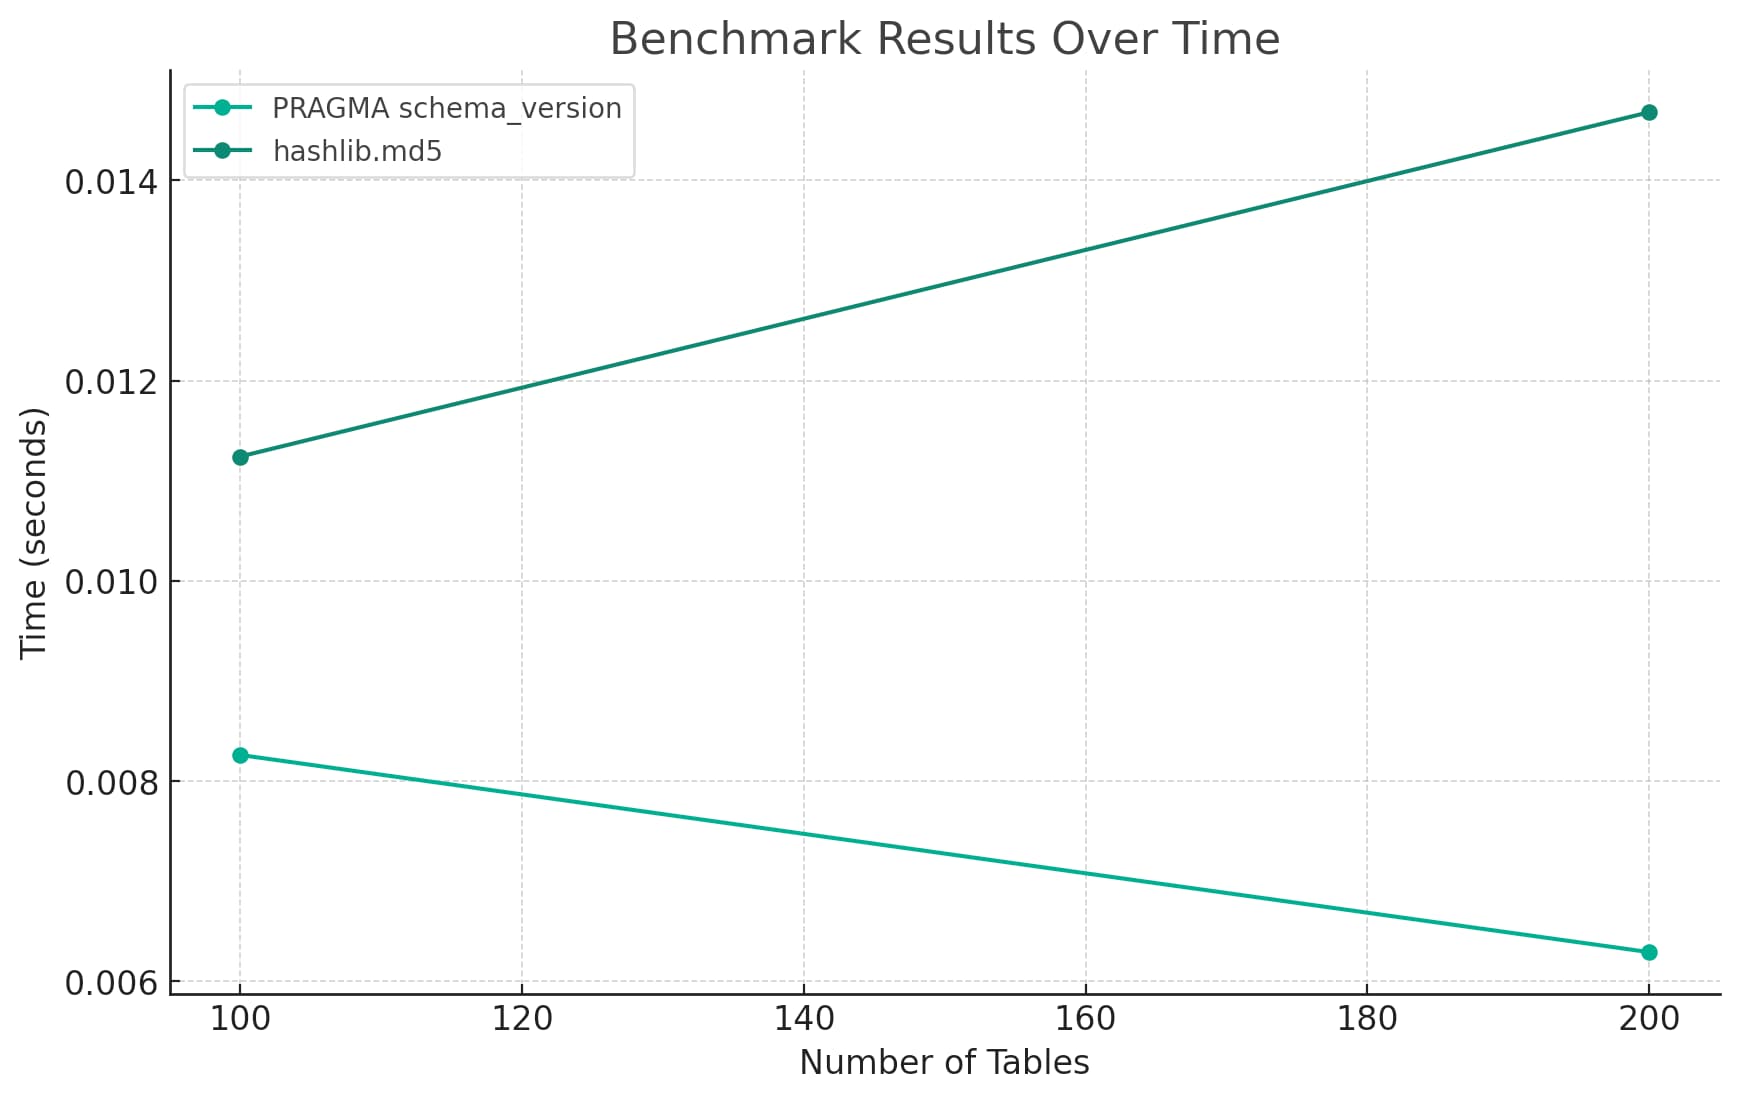 Benchmark Results Over Time - two lines, one for PRAGMA schema_version and one for hashlib.md5. There are only two points on the chart - at 100 tables and at 200 tables - with straight lines between them.